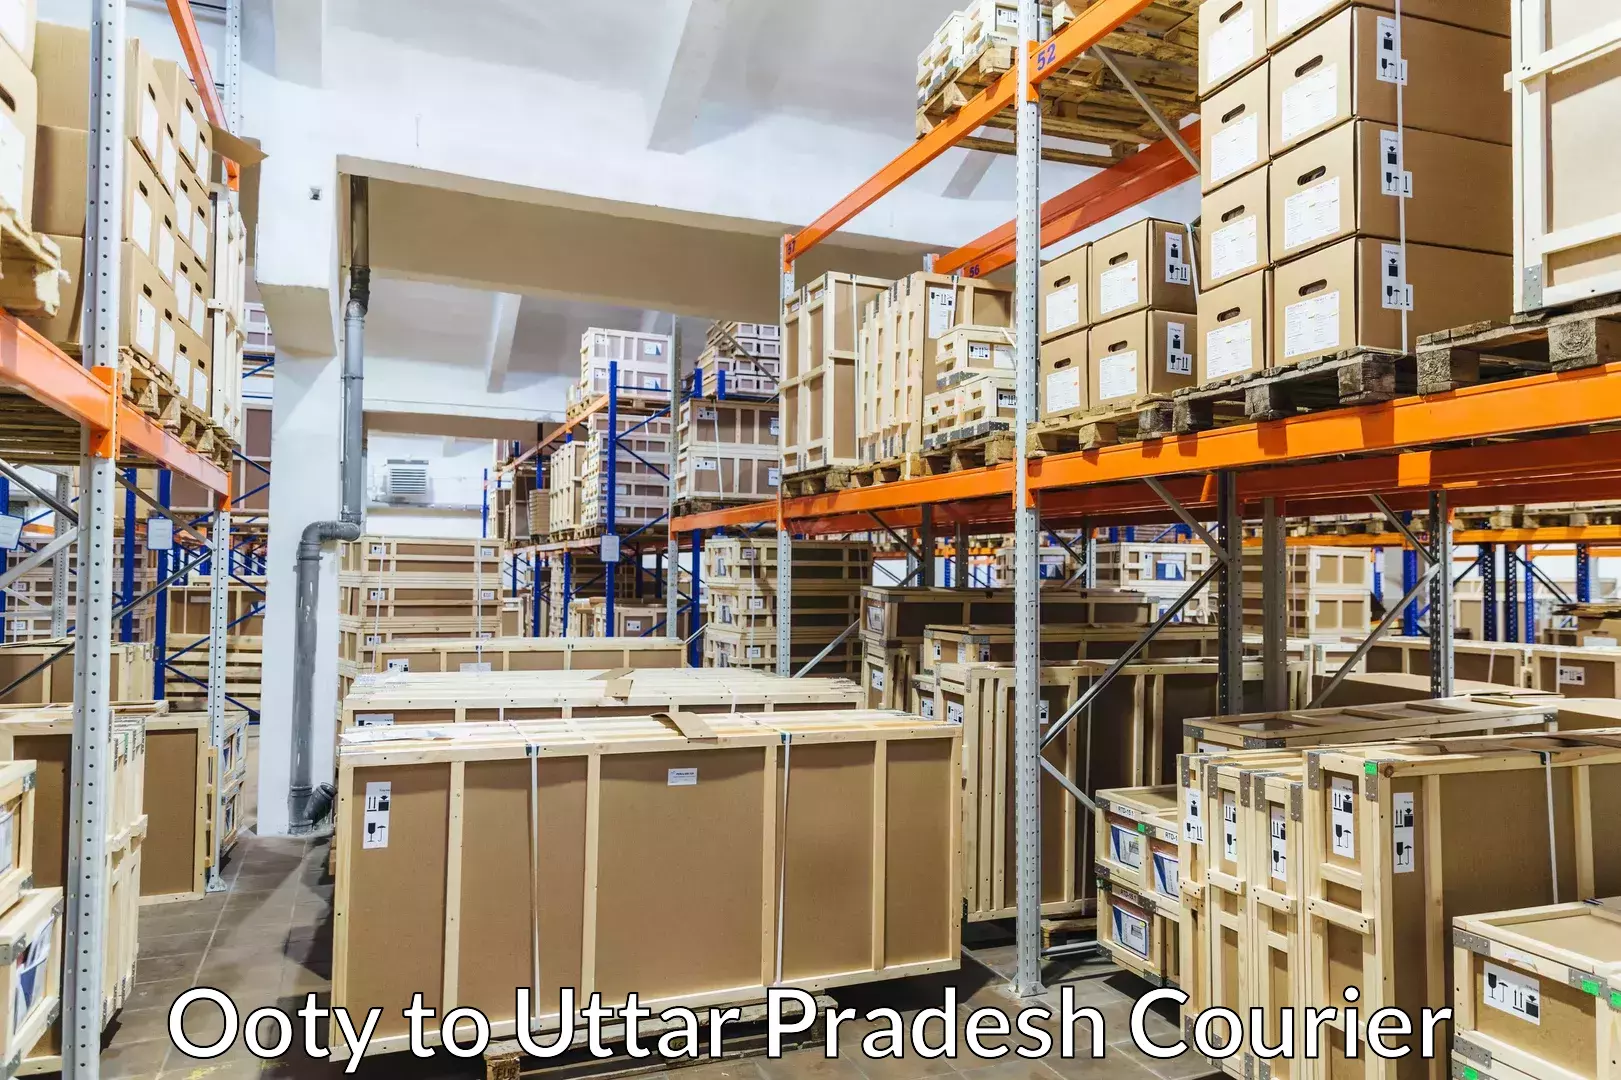 Luggage delivery network Ooty to Uttar Pradesh